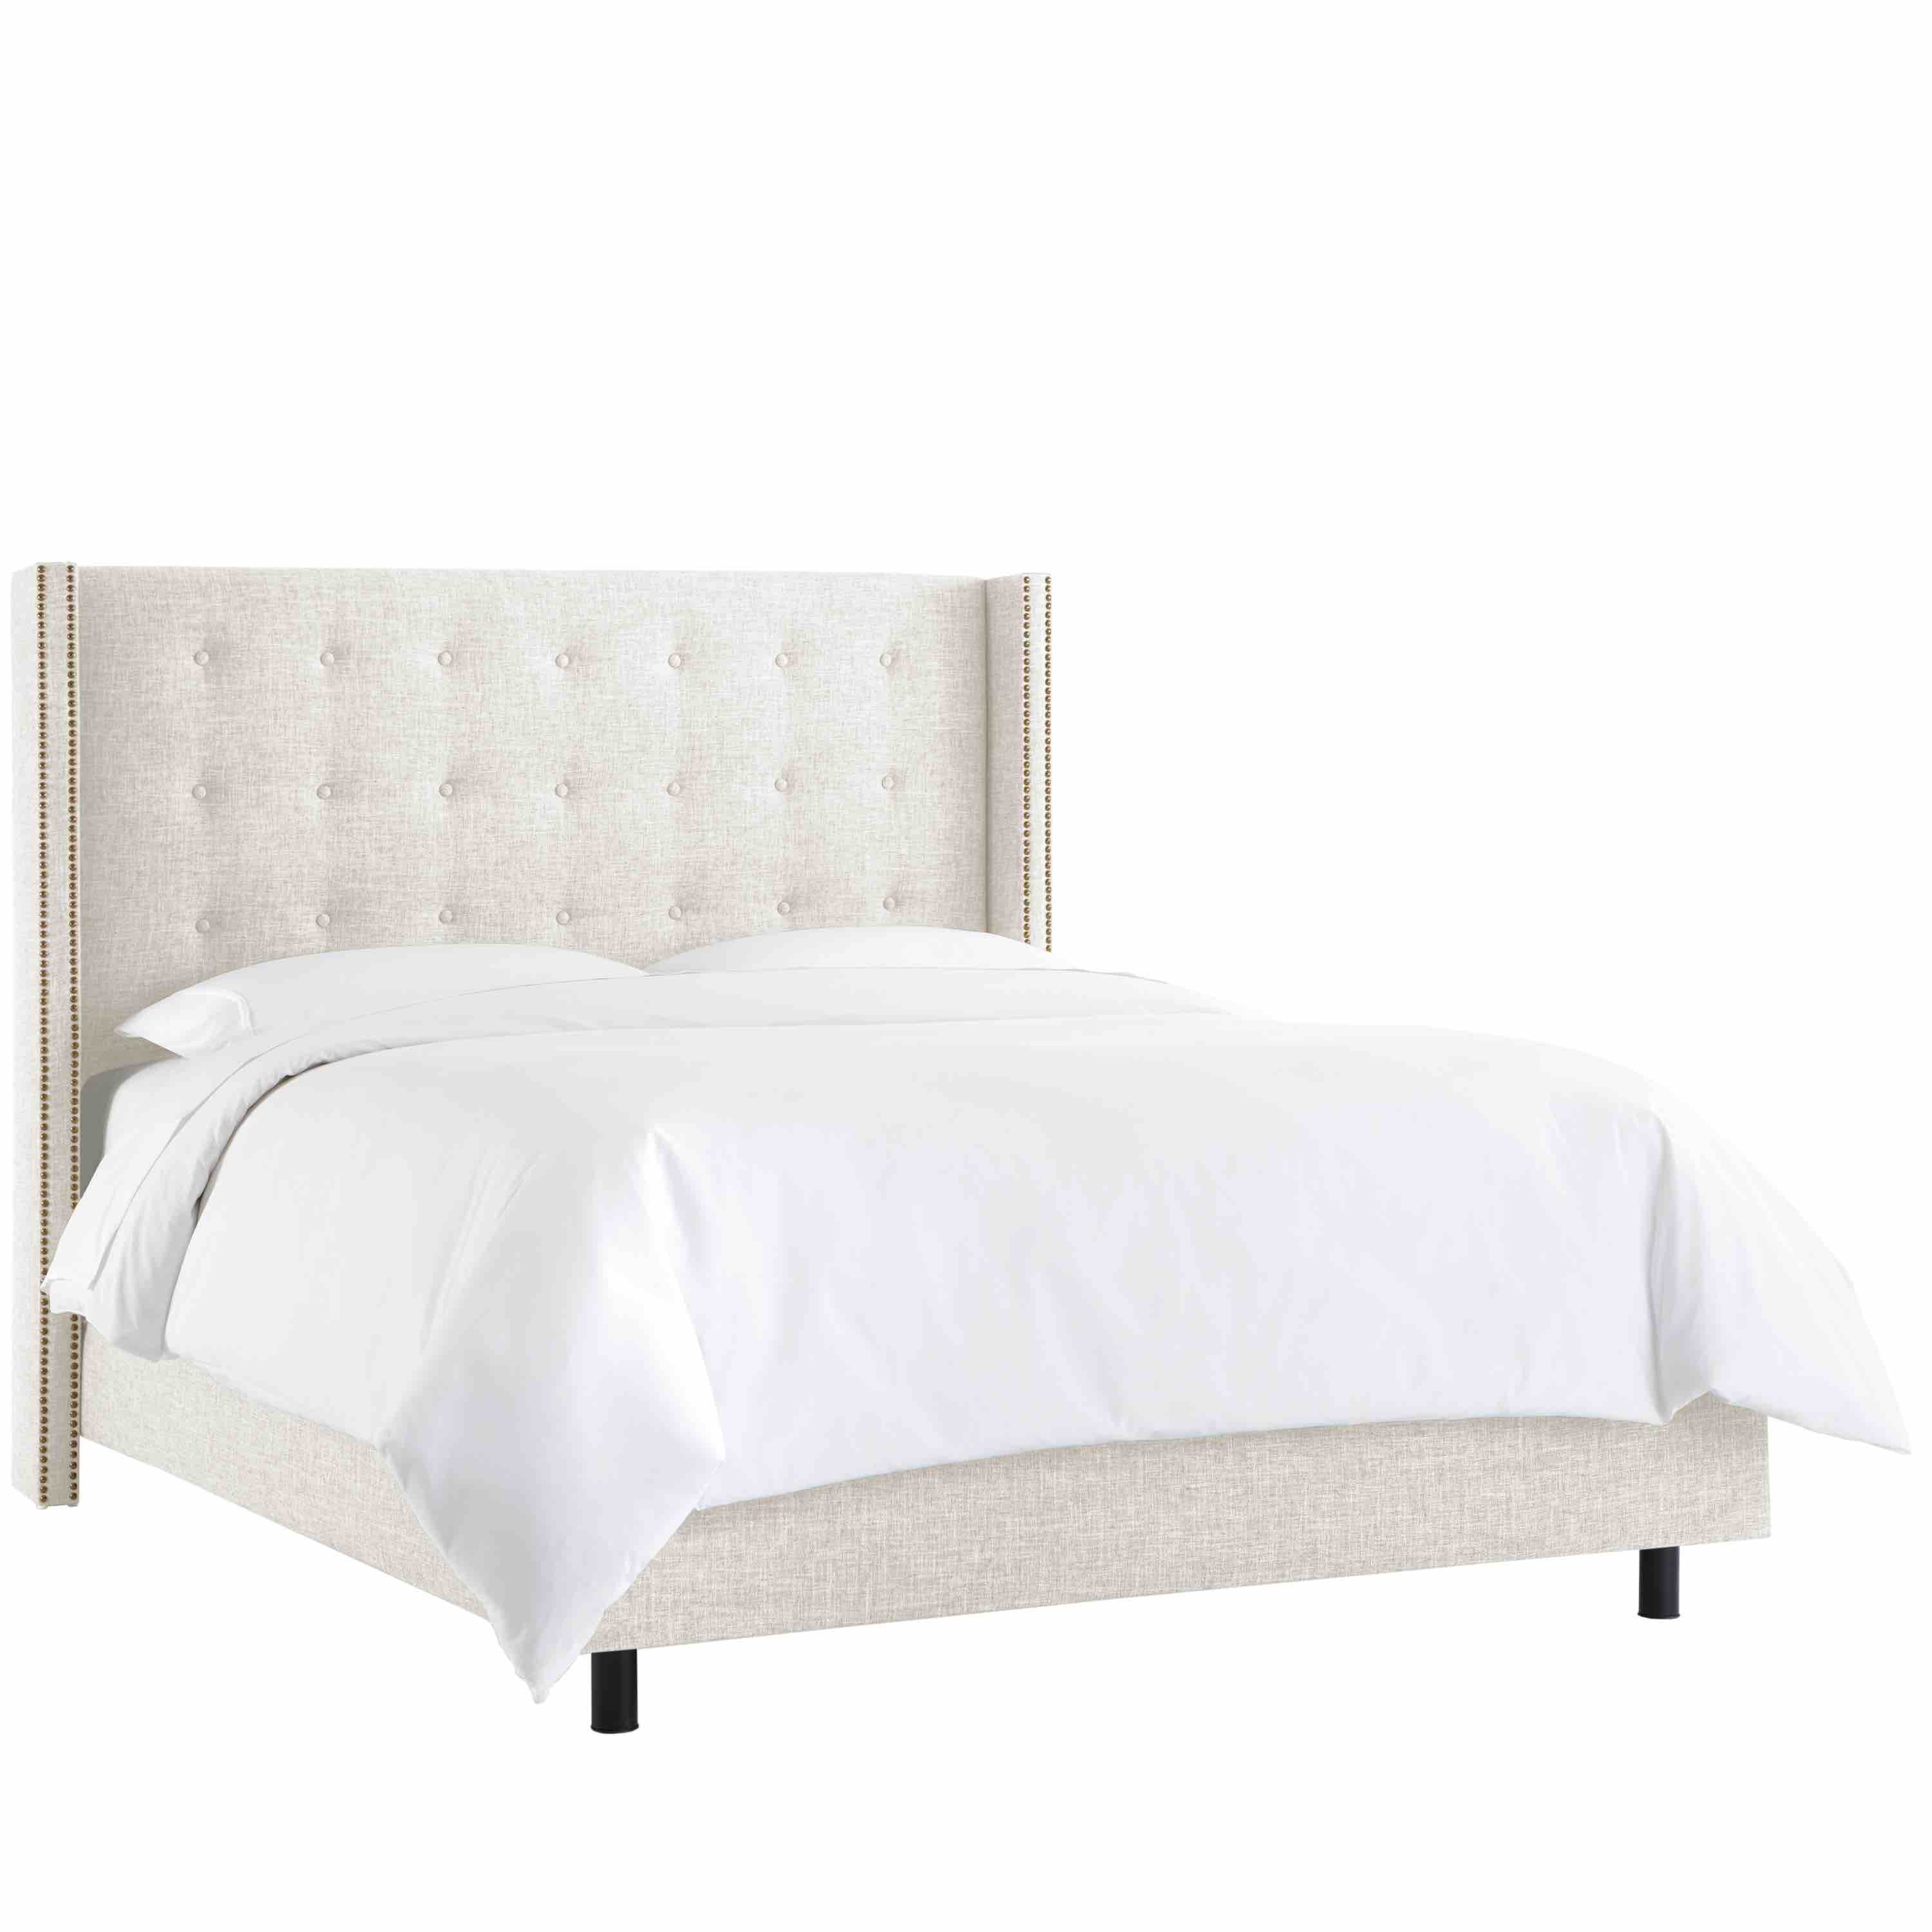 King Nail Button Tufted Wingback Bed in Zuma White - Third & Vine